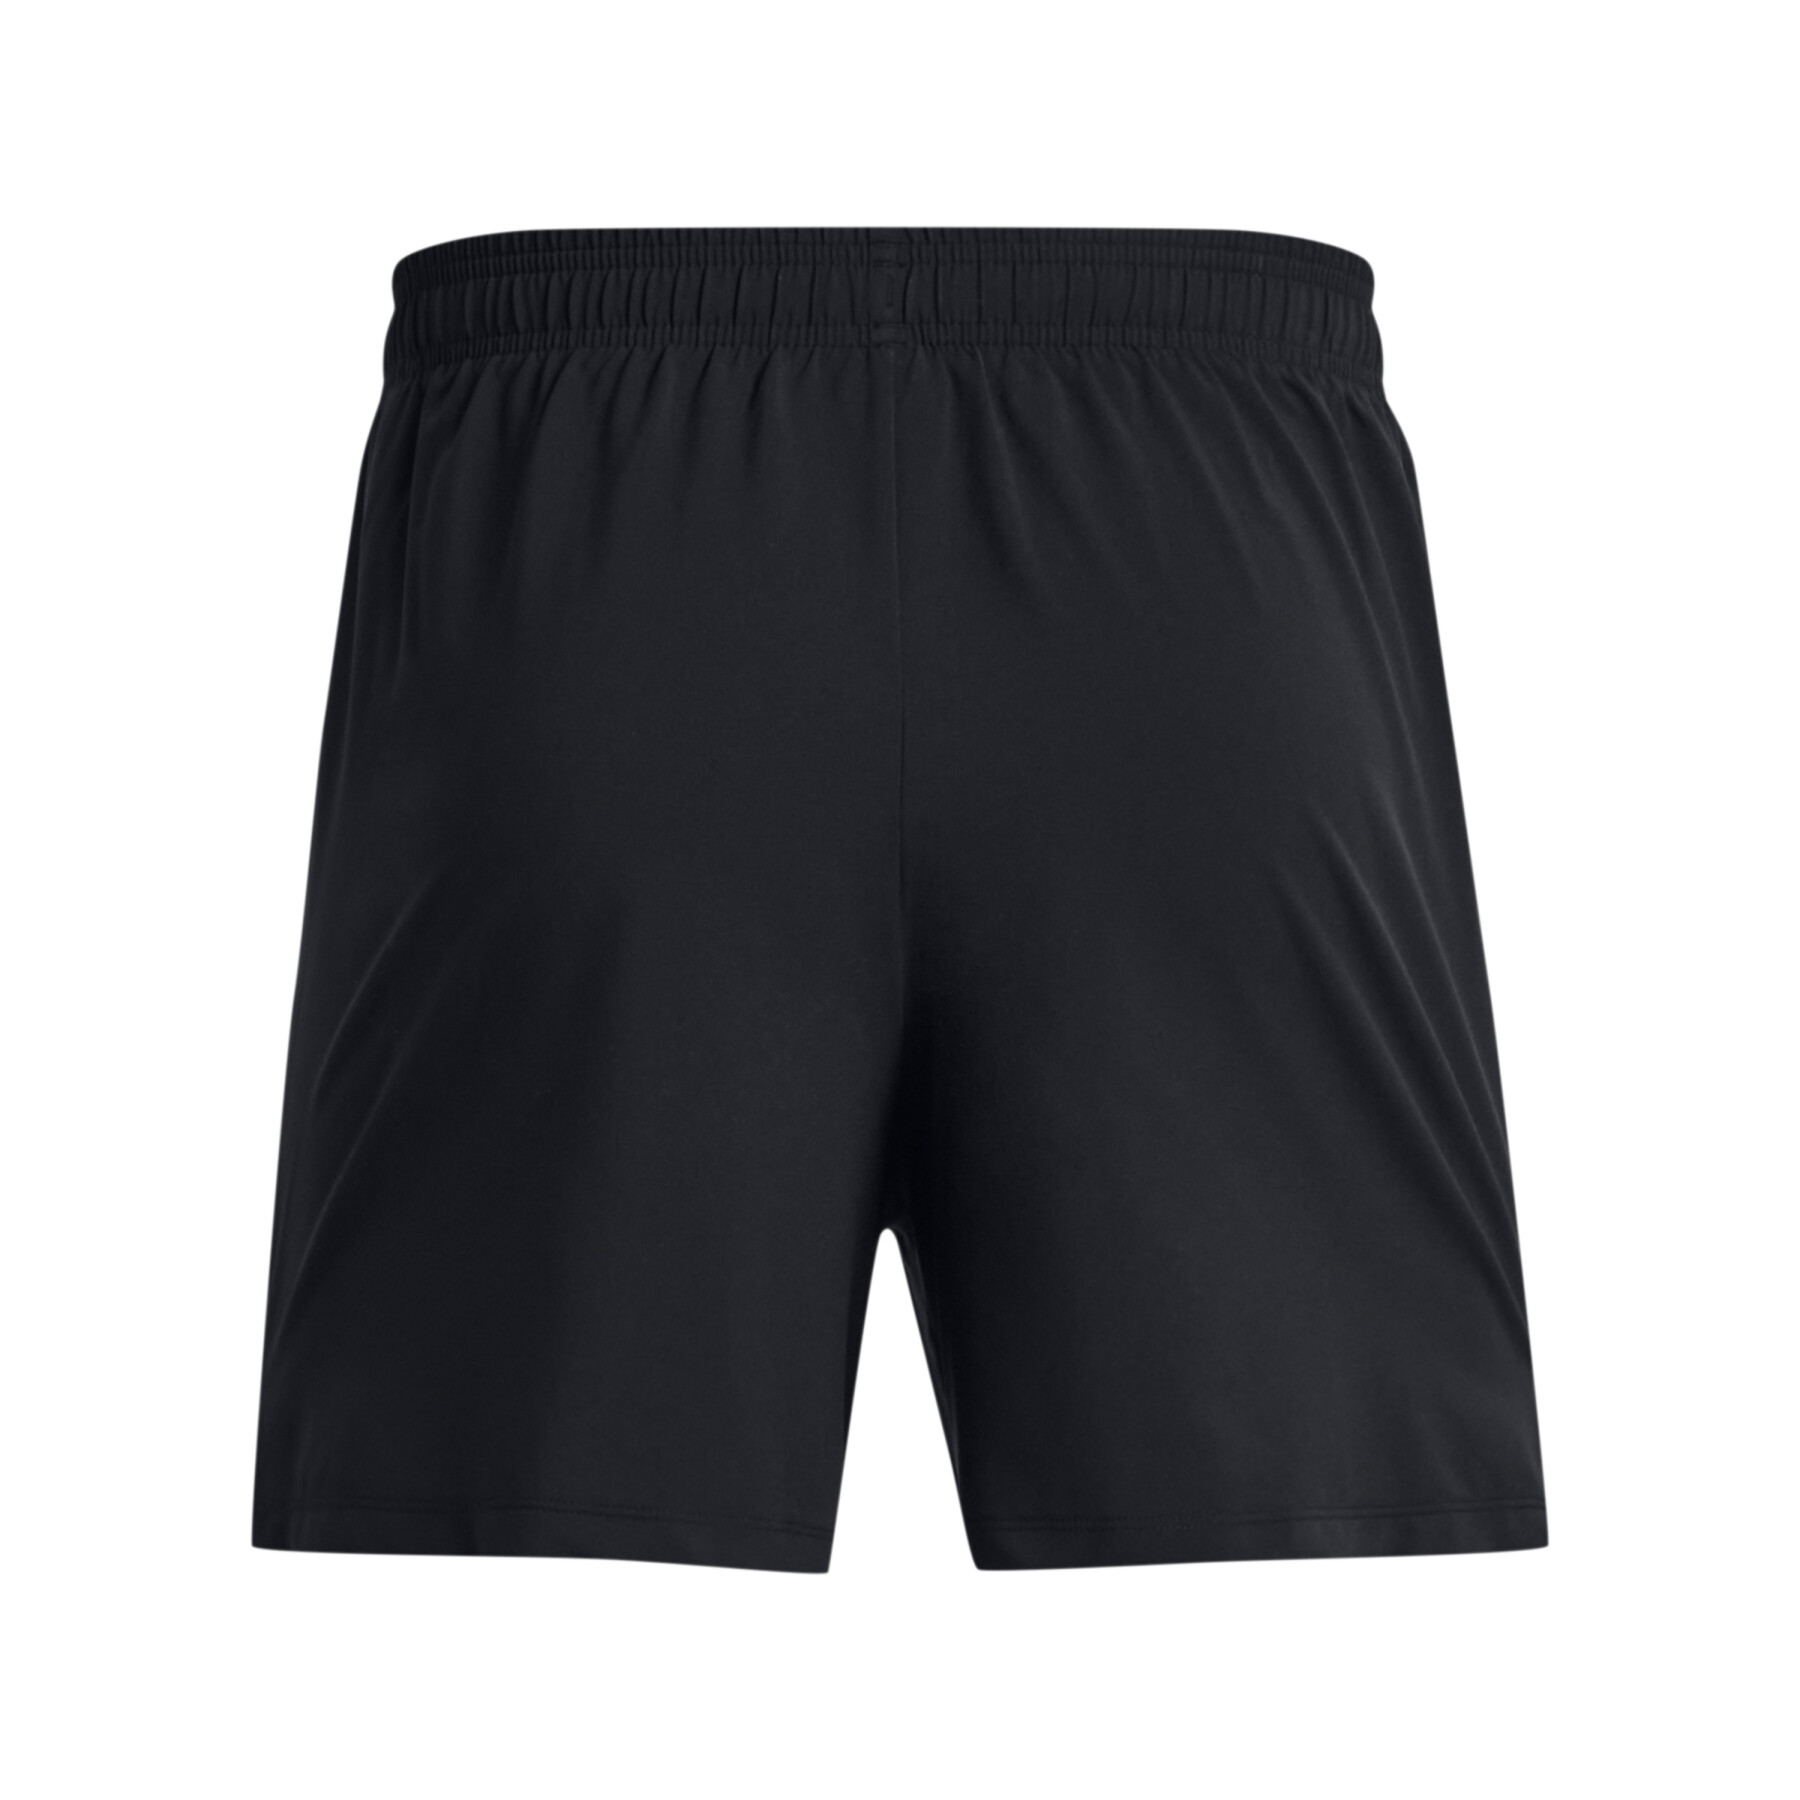 Breve Under Armour Project Rock Leg Day